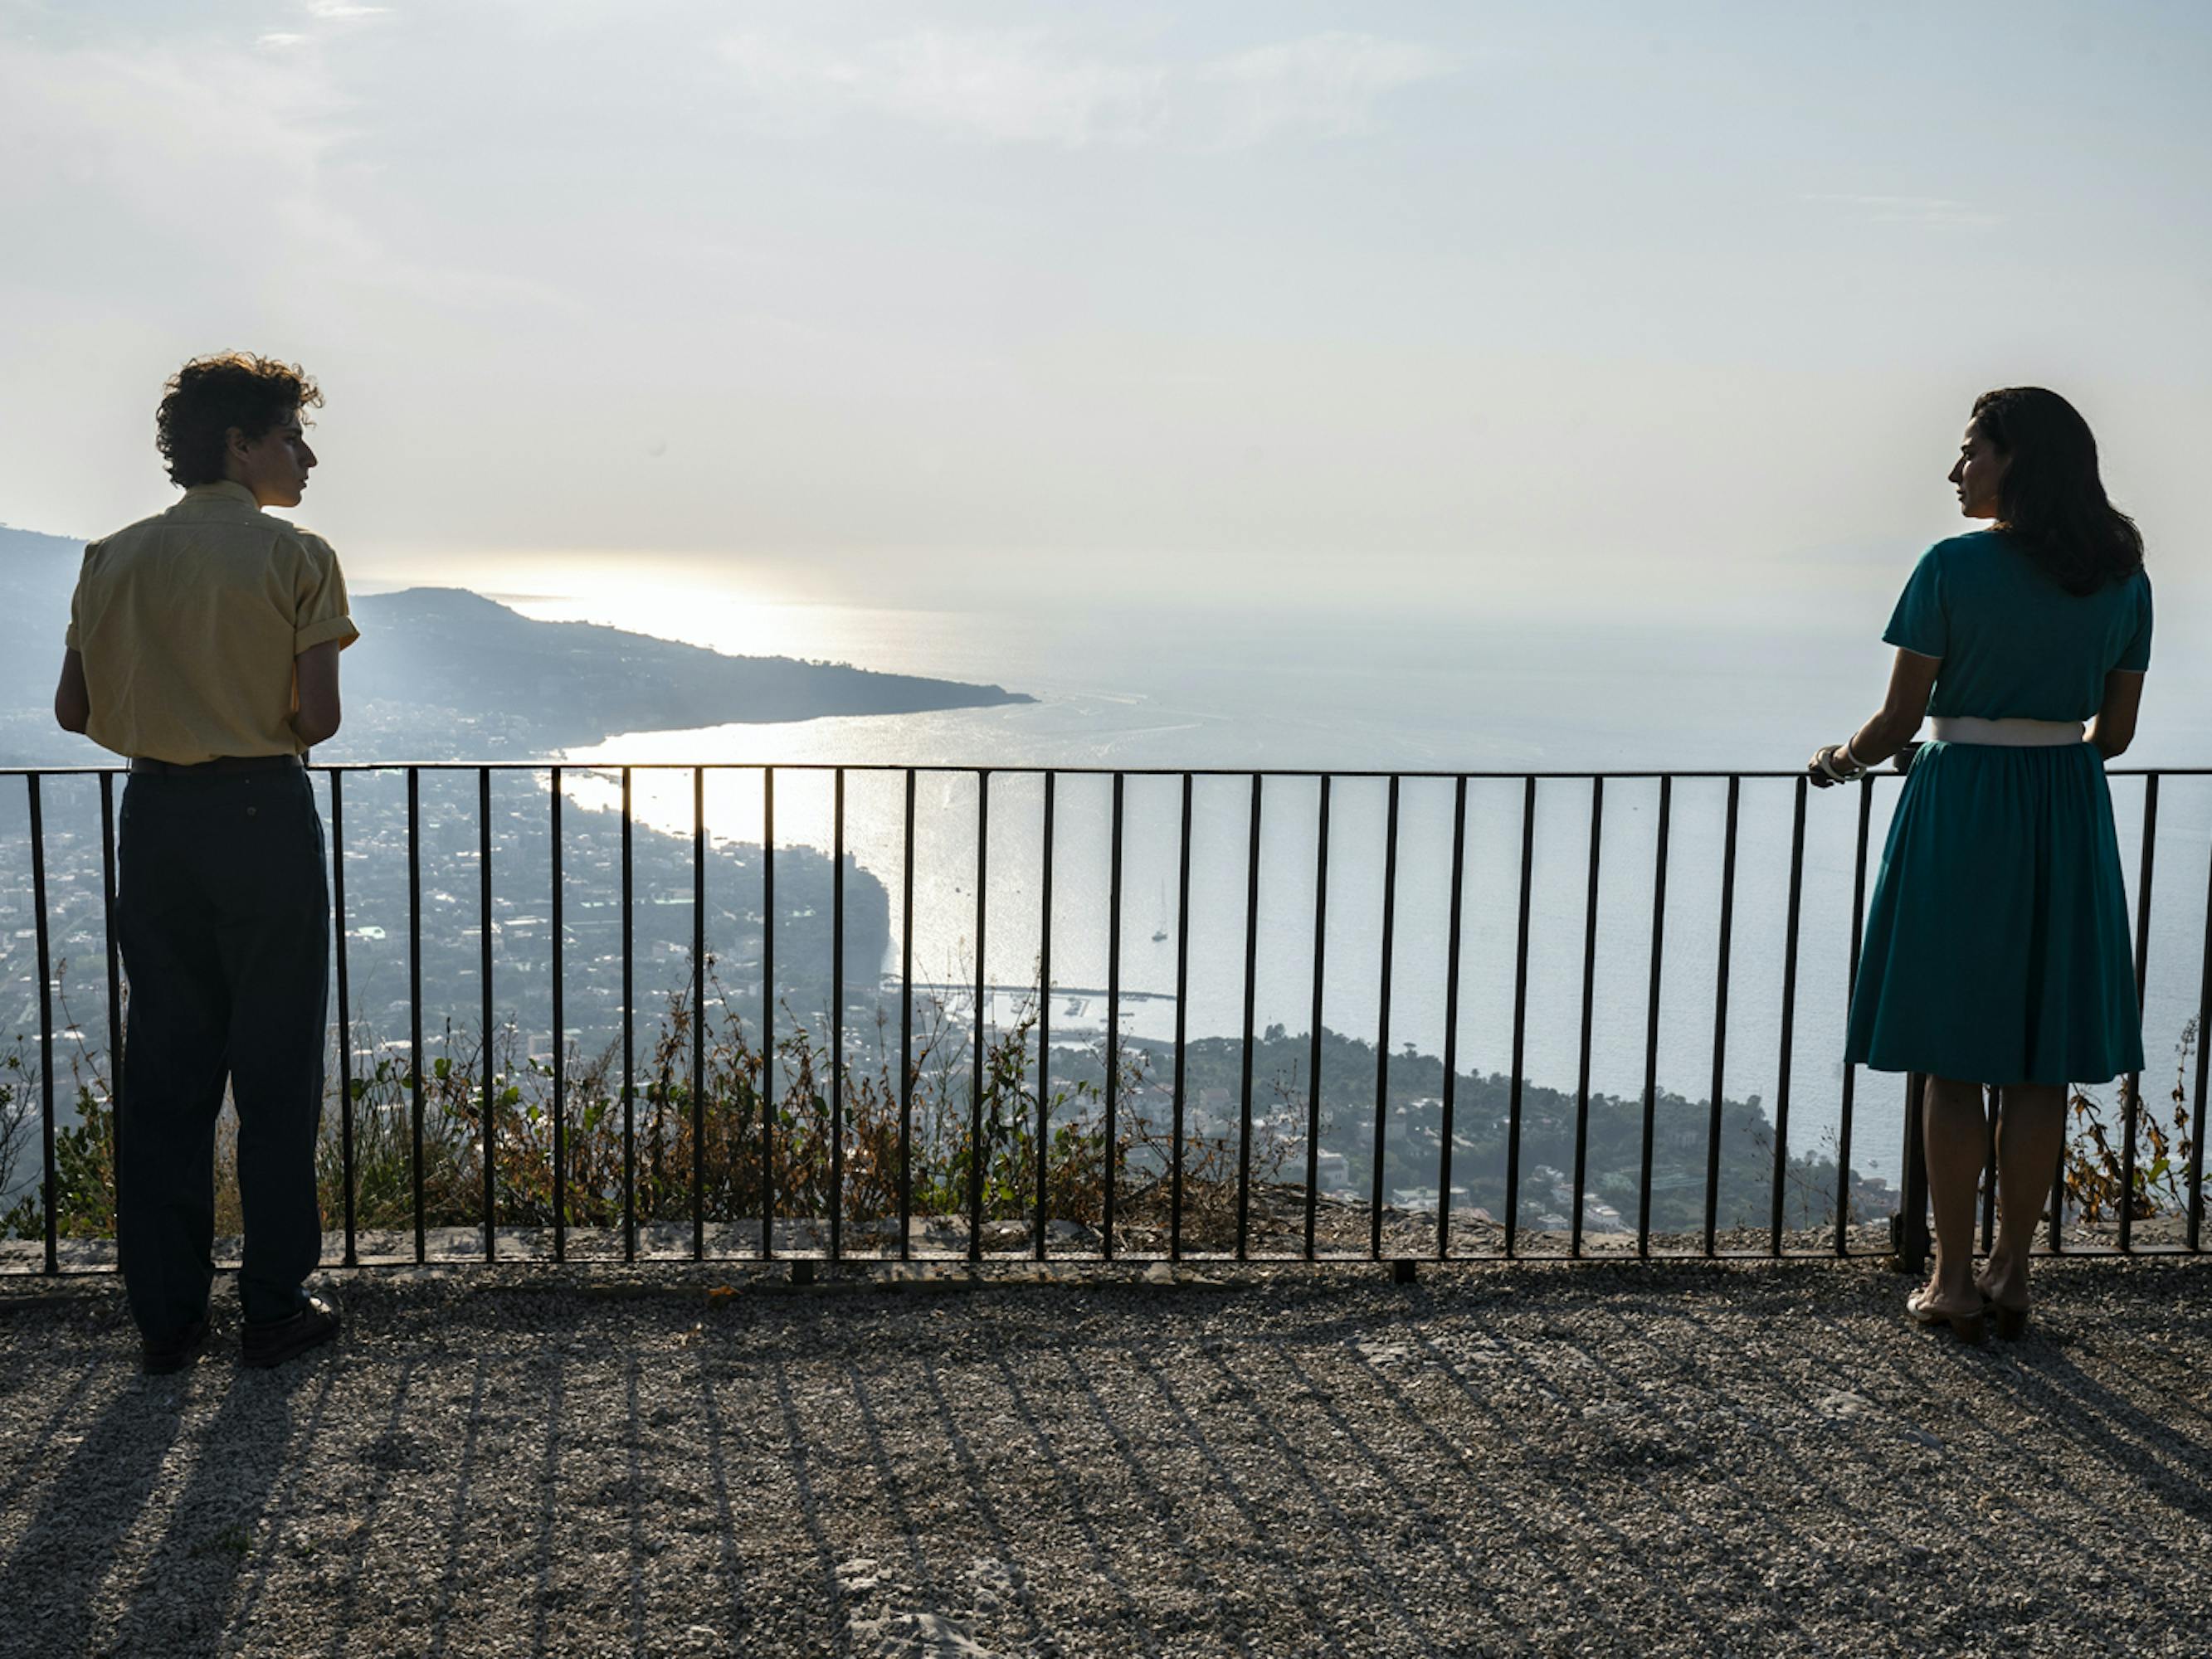 Fabietto Schisa (Filippo Scotti) and Patrizia (Luisa Ranieri) stand beside a railing looking at each other and at the sunlit water. 